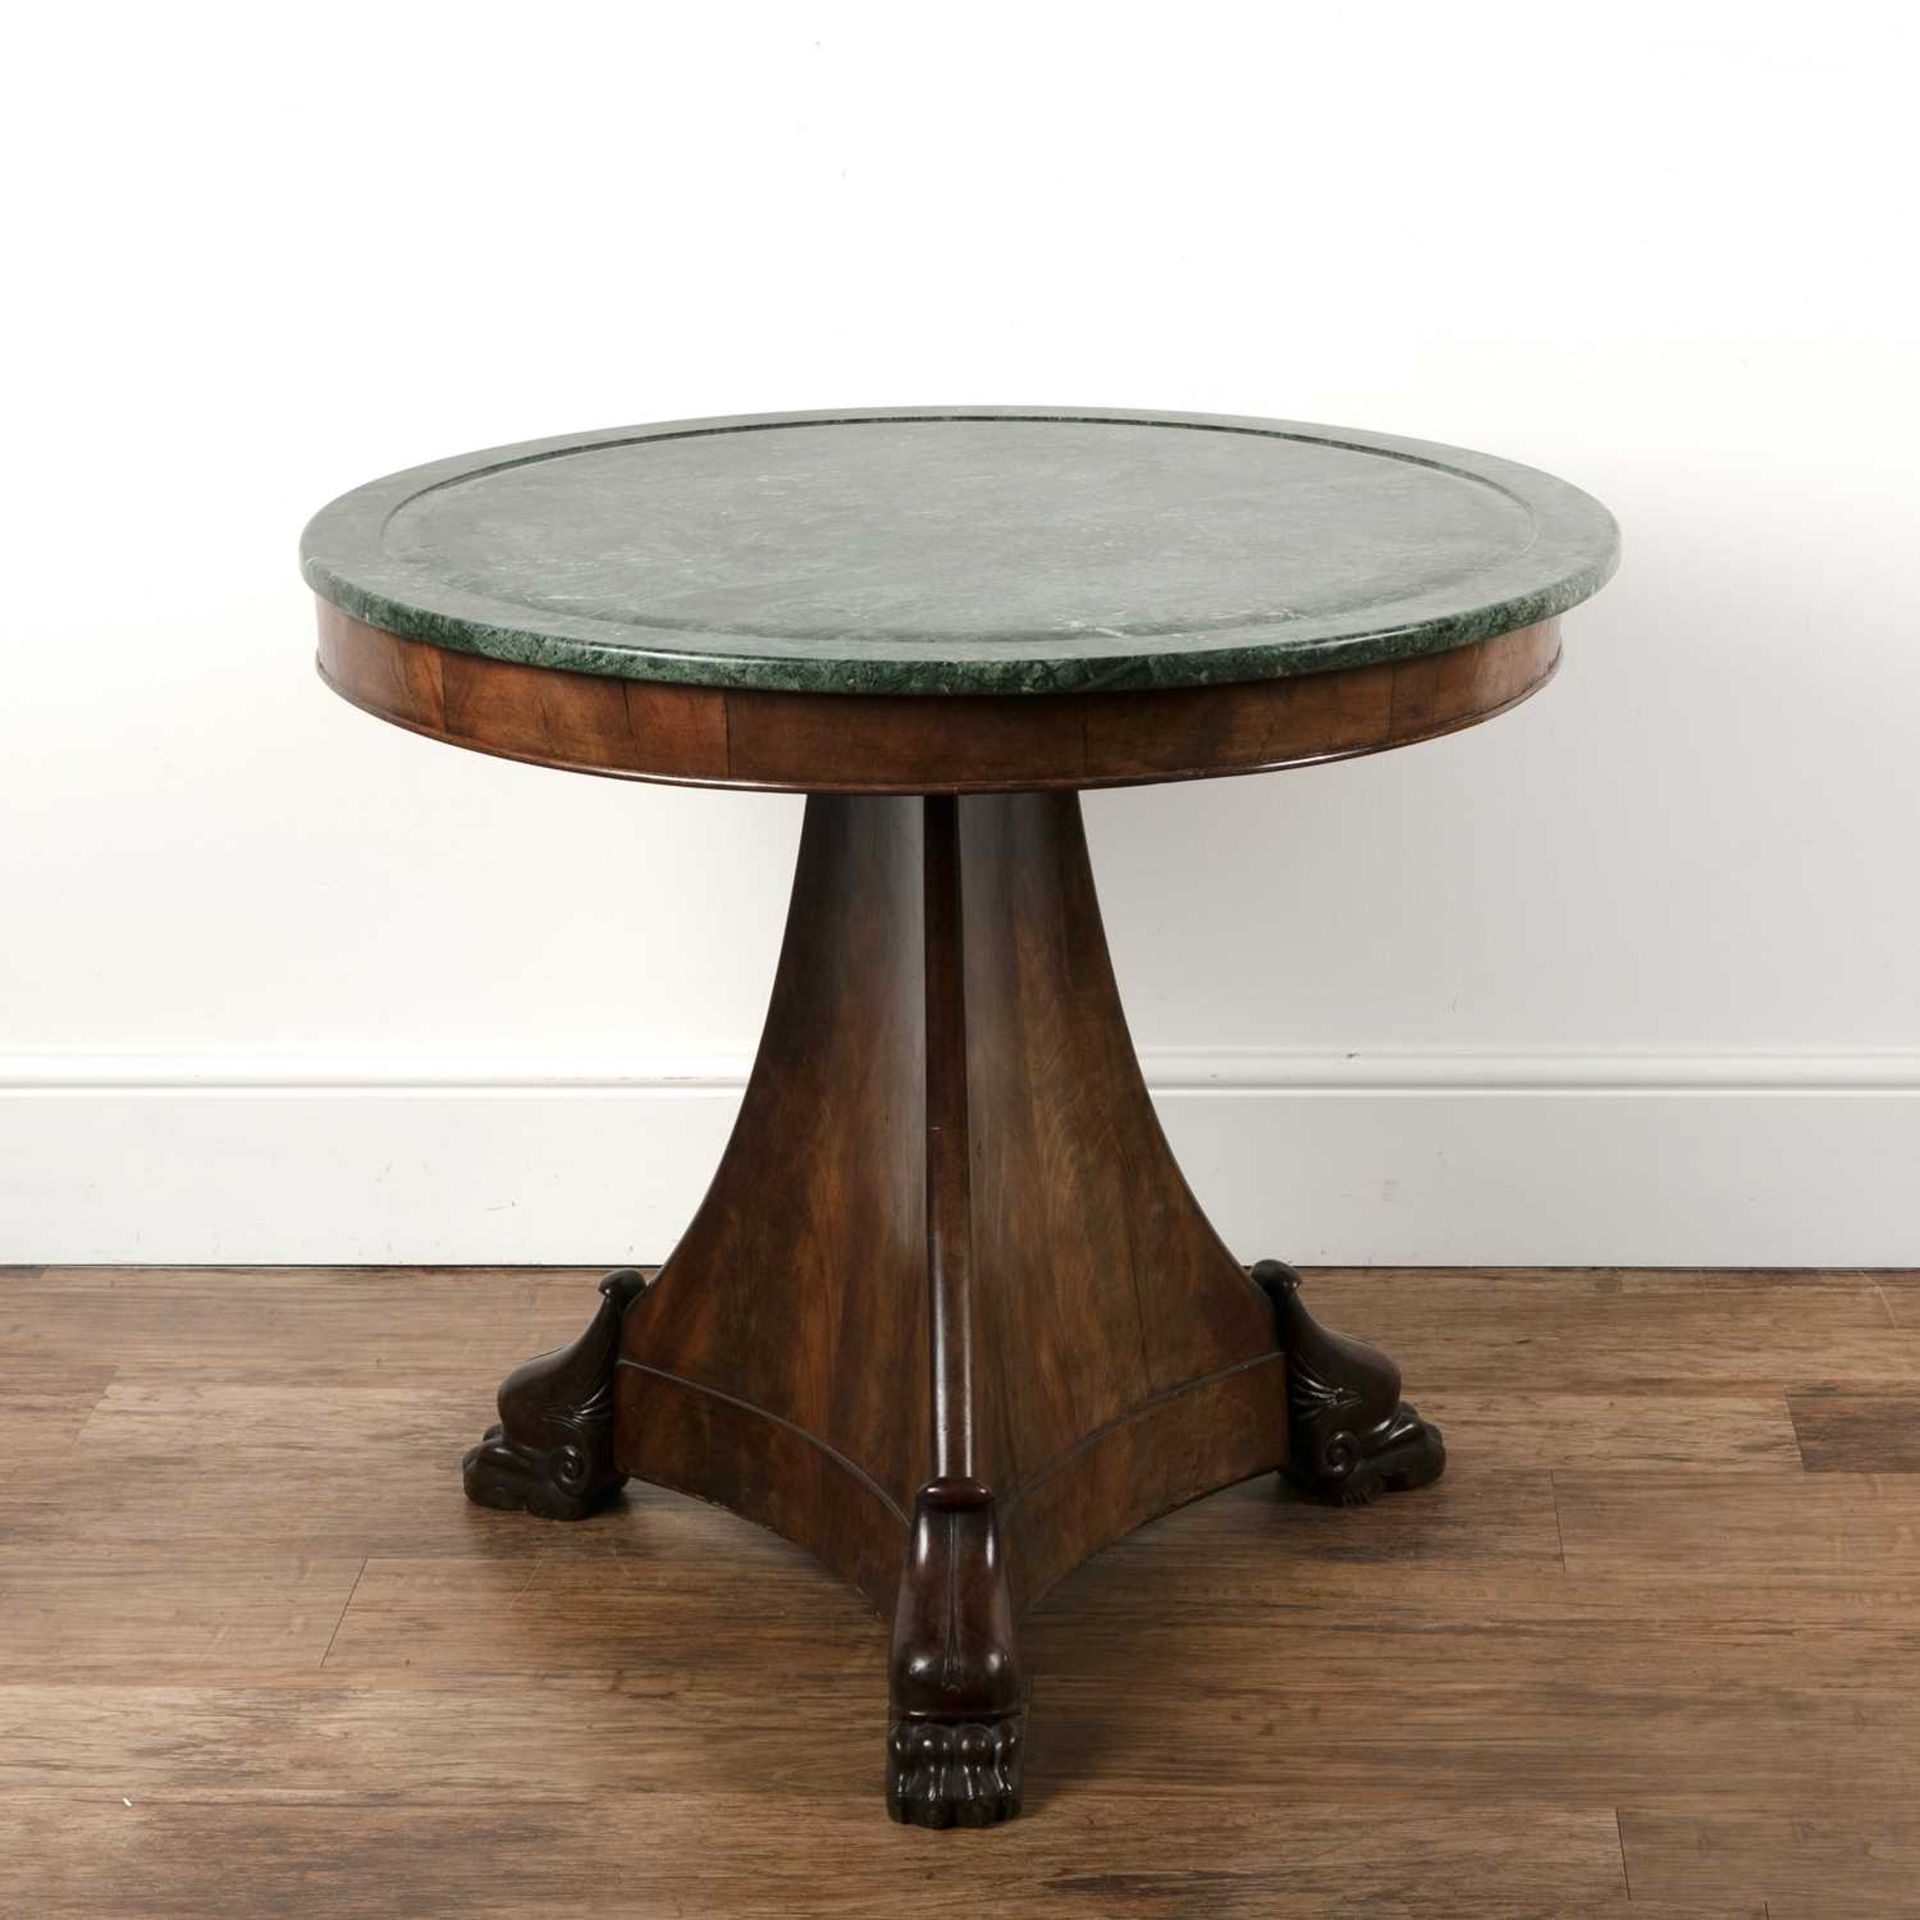 Mahogany centre or library table With a later green marble top, a triform base, and claw feet, 83.